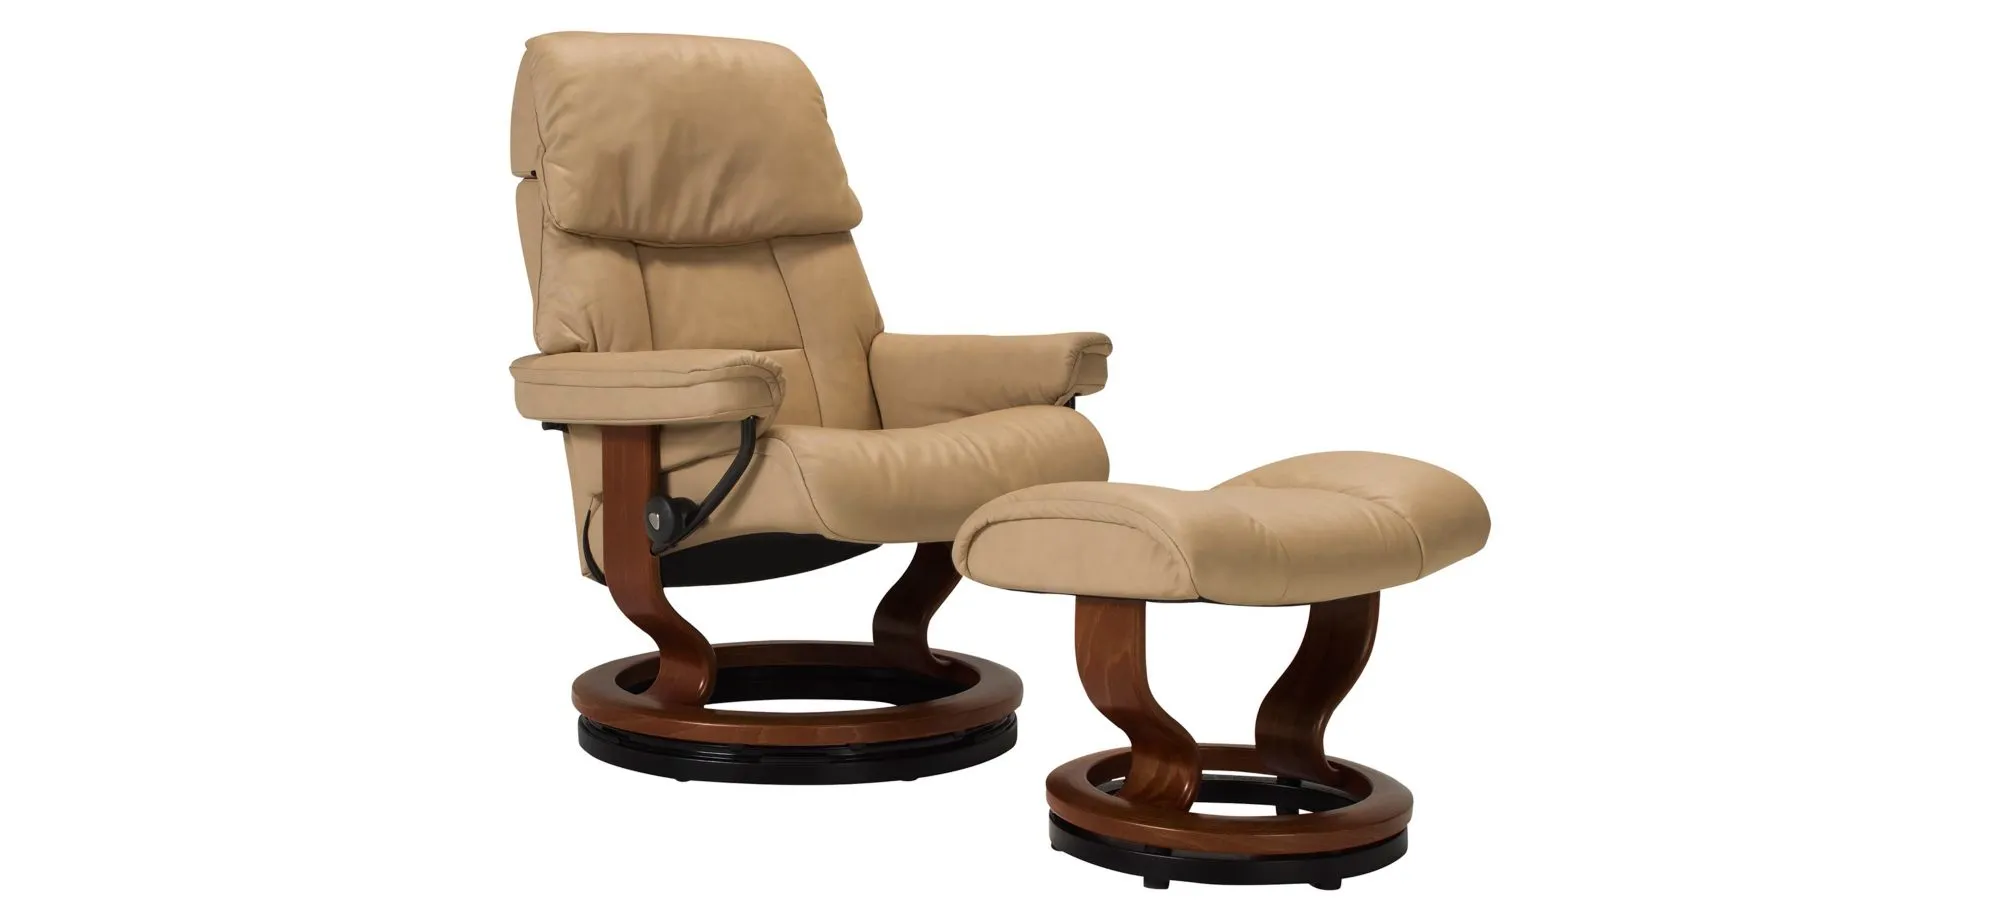 Stressless Ruby Medium Leather Reclining Chair and Ottoman w/ Rings in Sand / Brown by Stressless